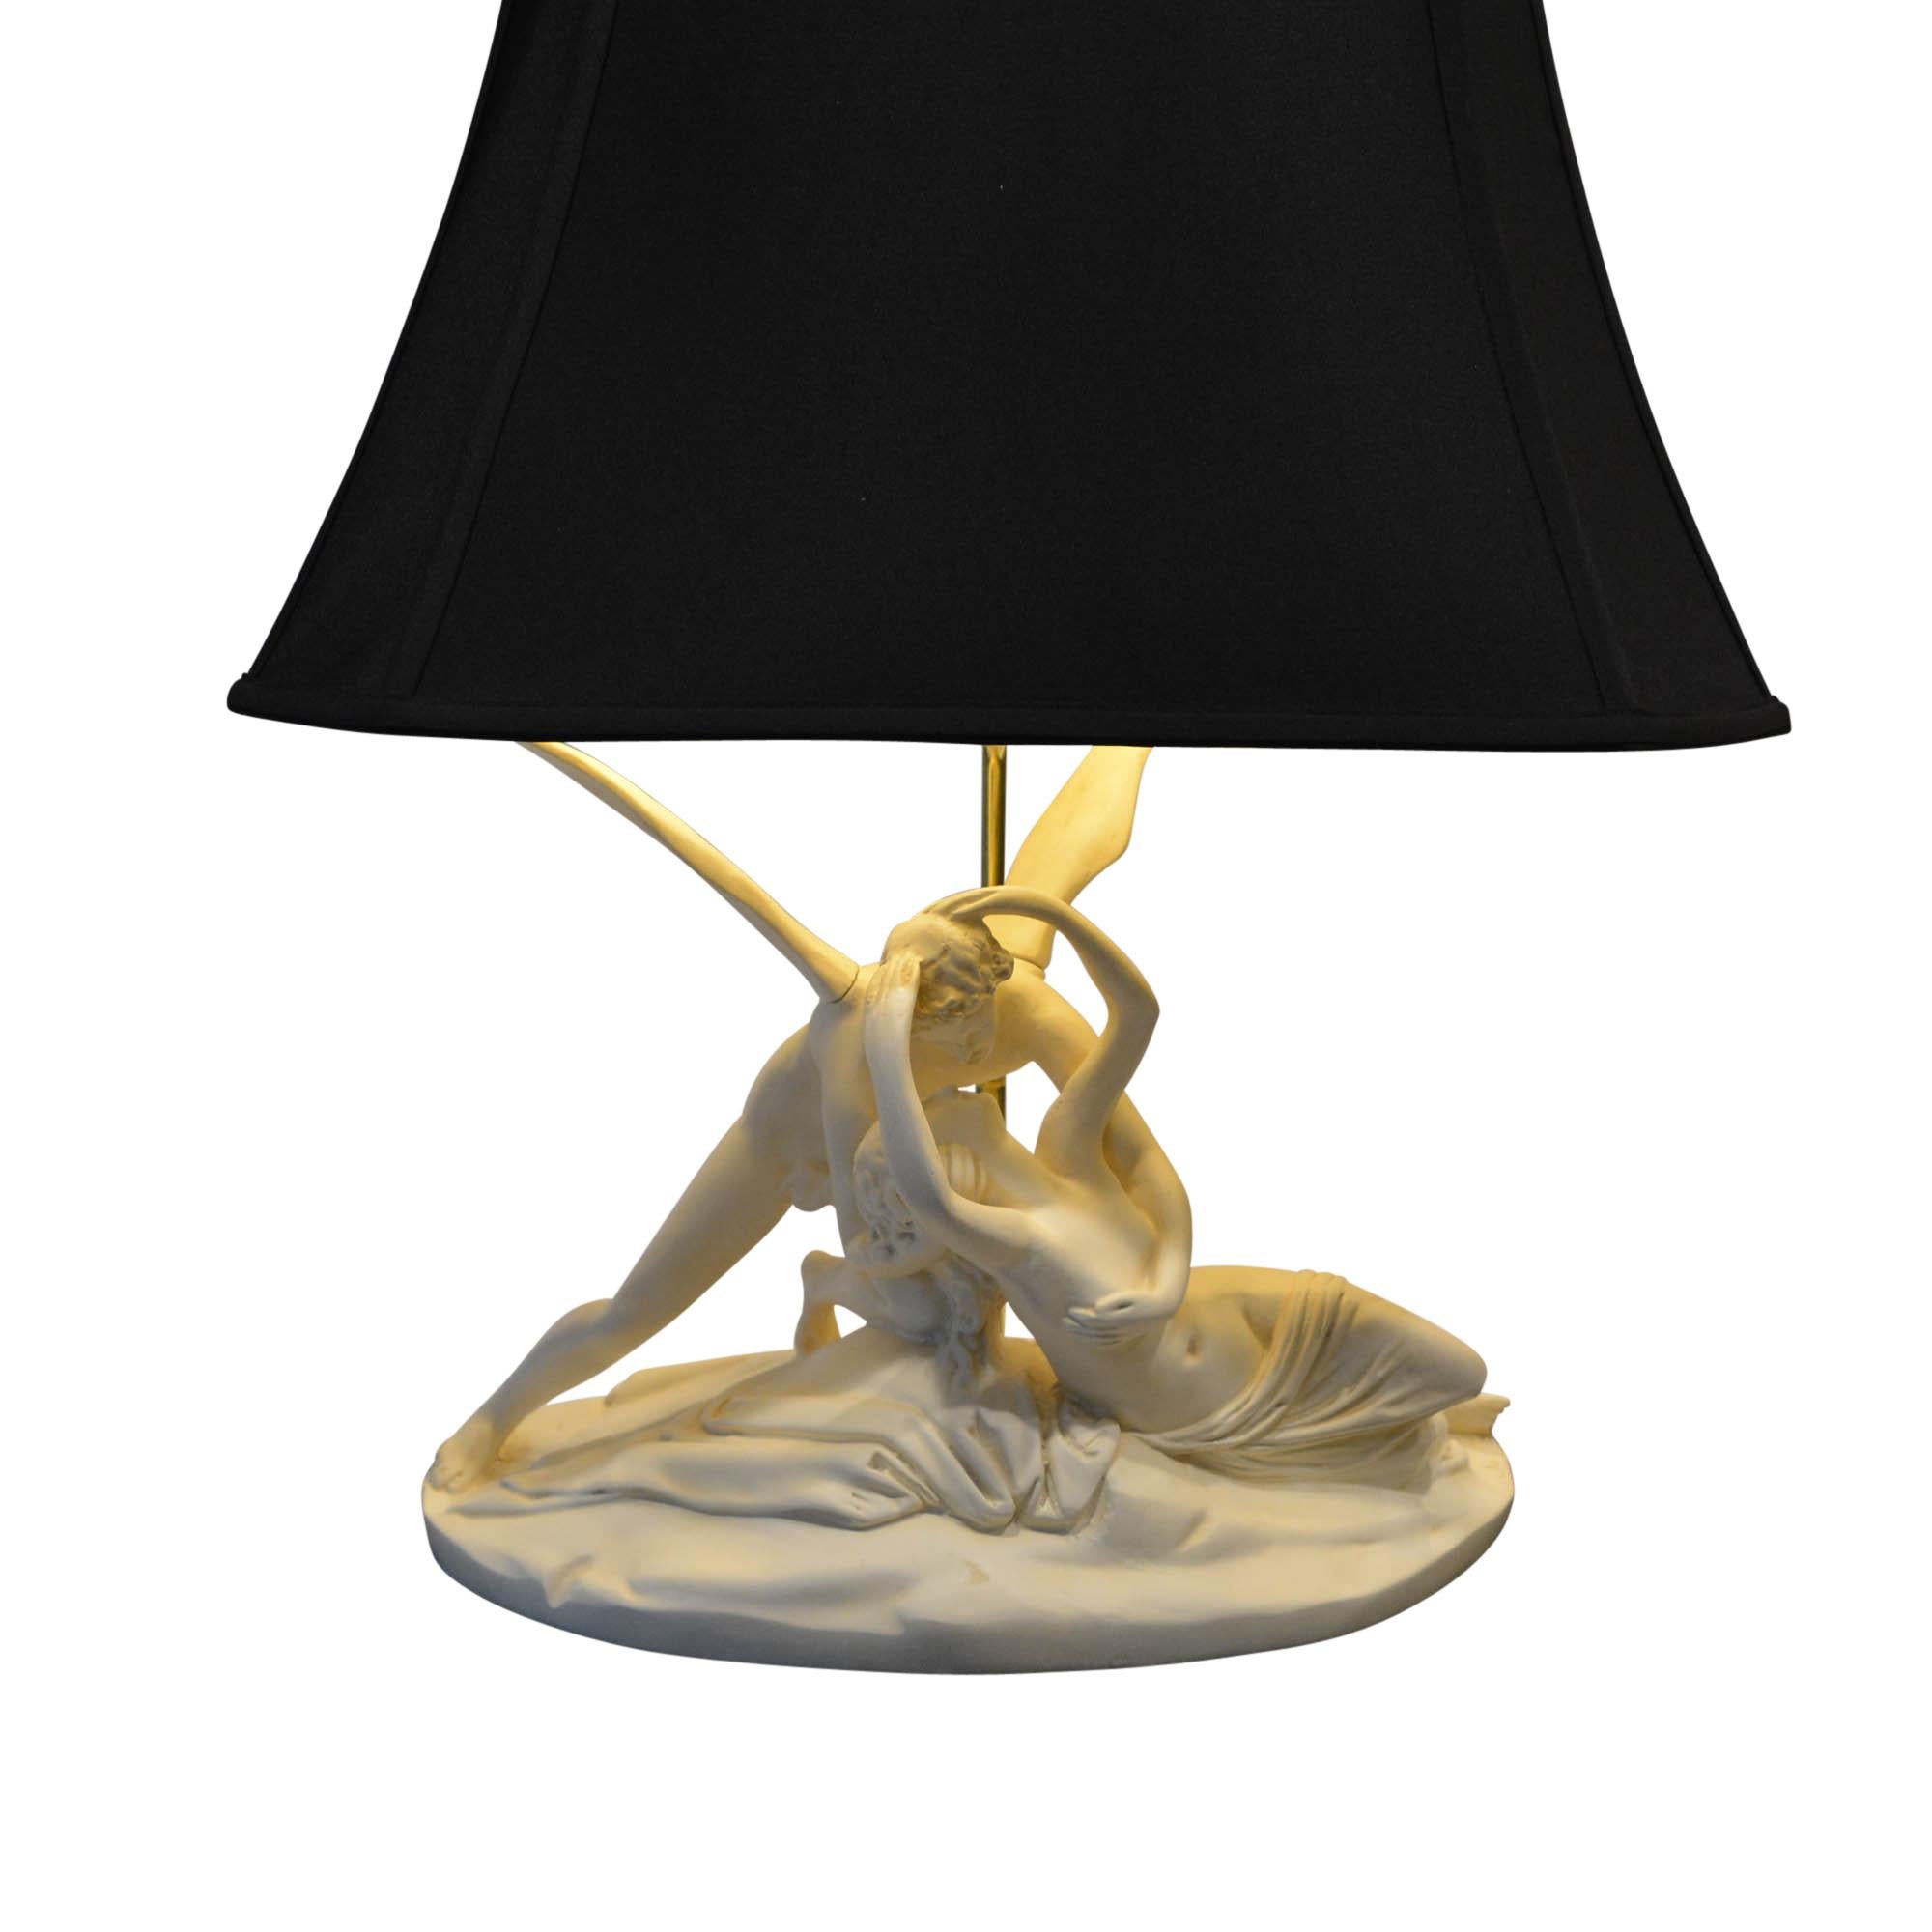 Psyche Revived by Cupid's Kiss Lamp on Marble Base Black Shade Gold Lining 4